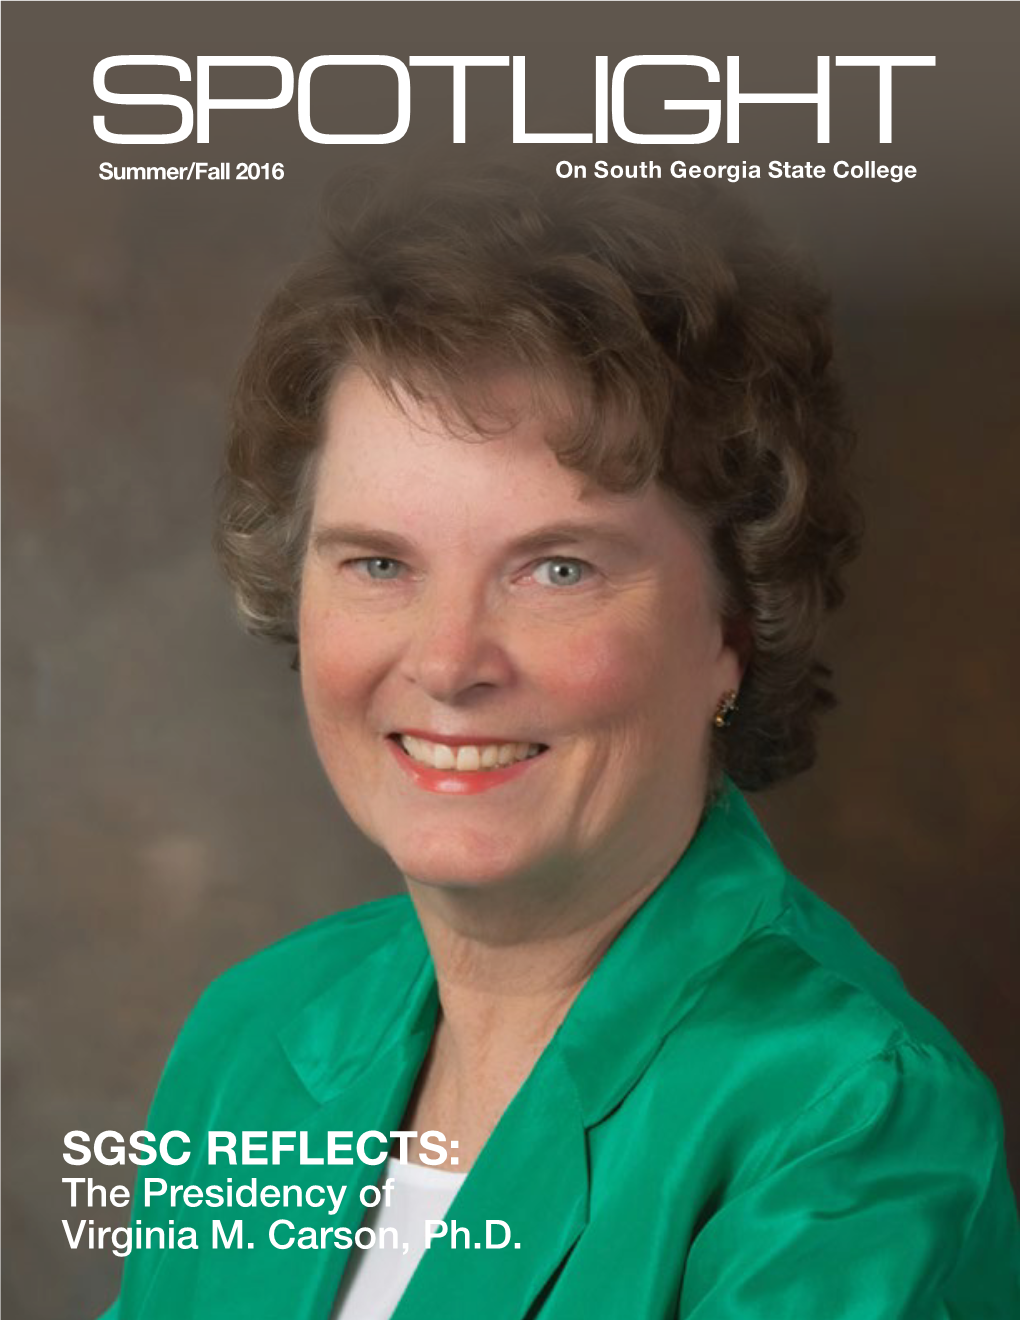 SGSC REFLECTS: the Presidency of Virginia M